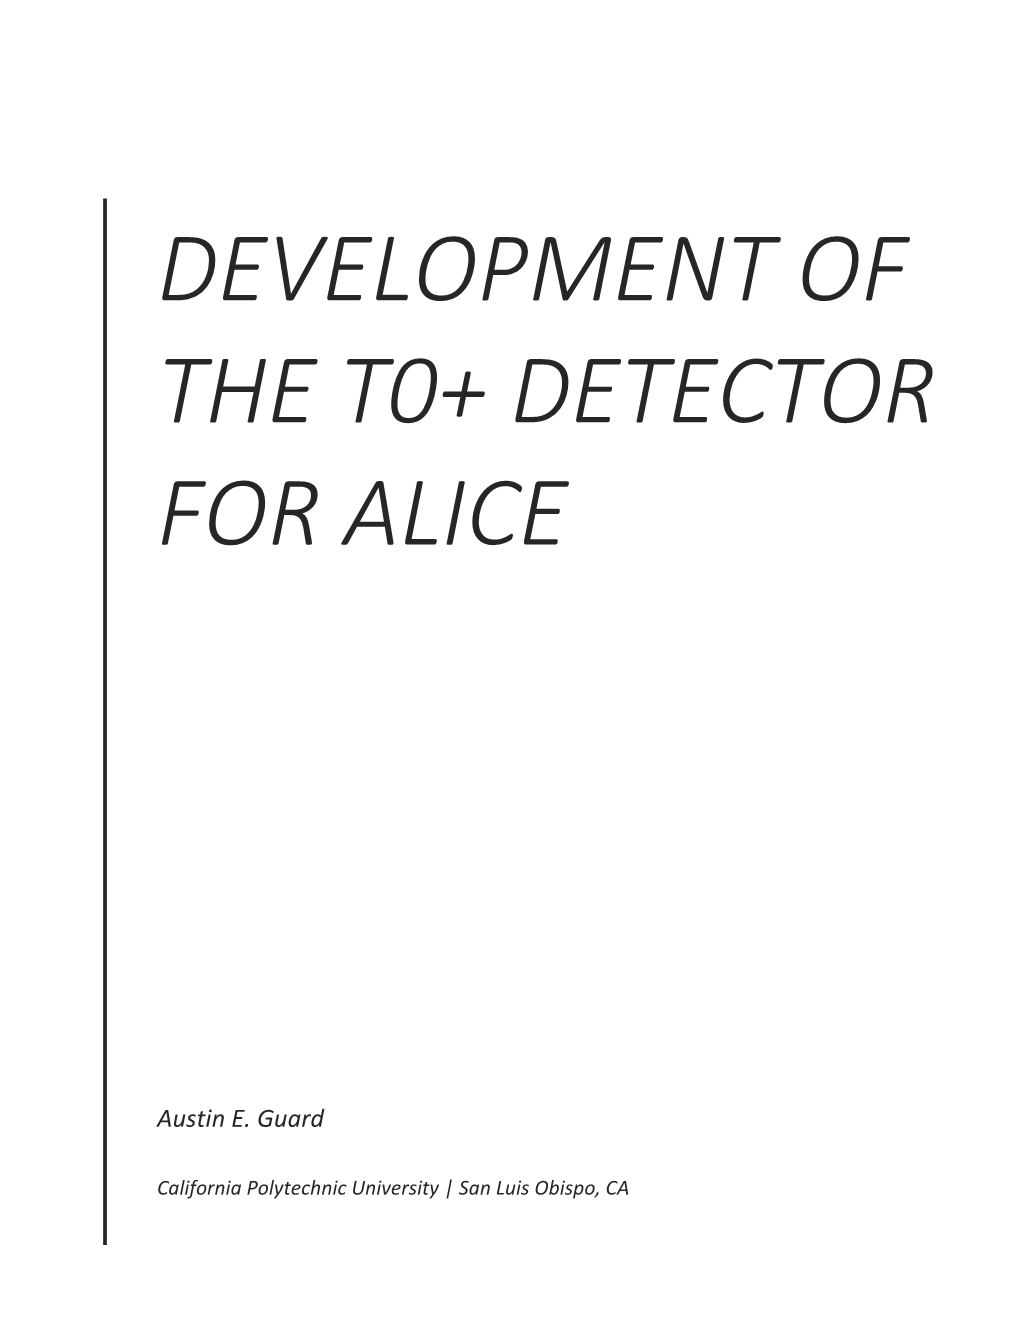 Development of the T0+ Detector for Alice